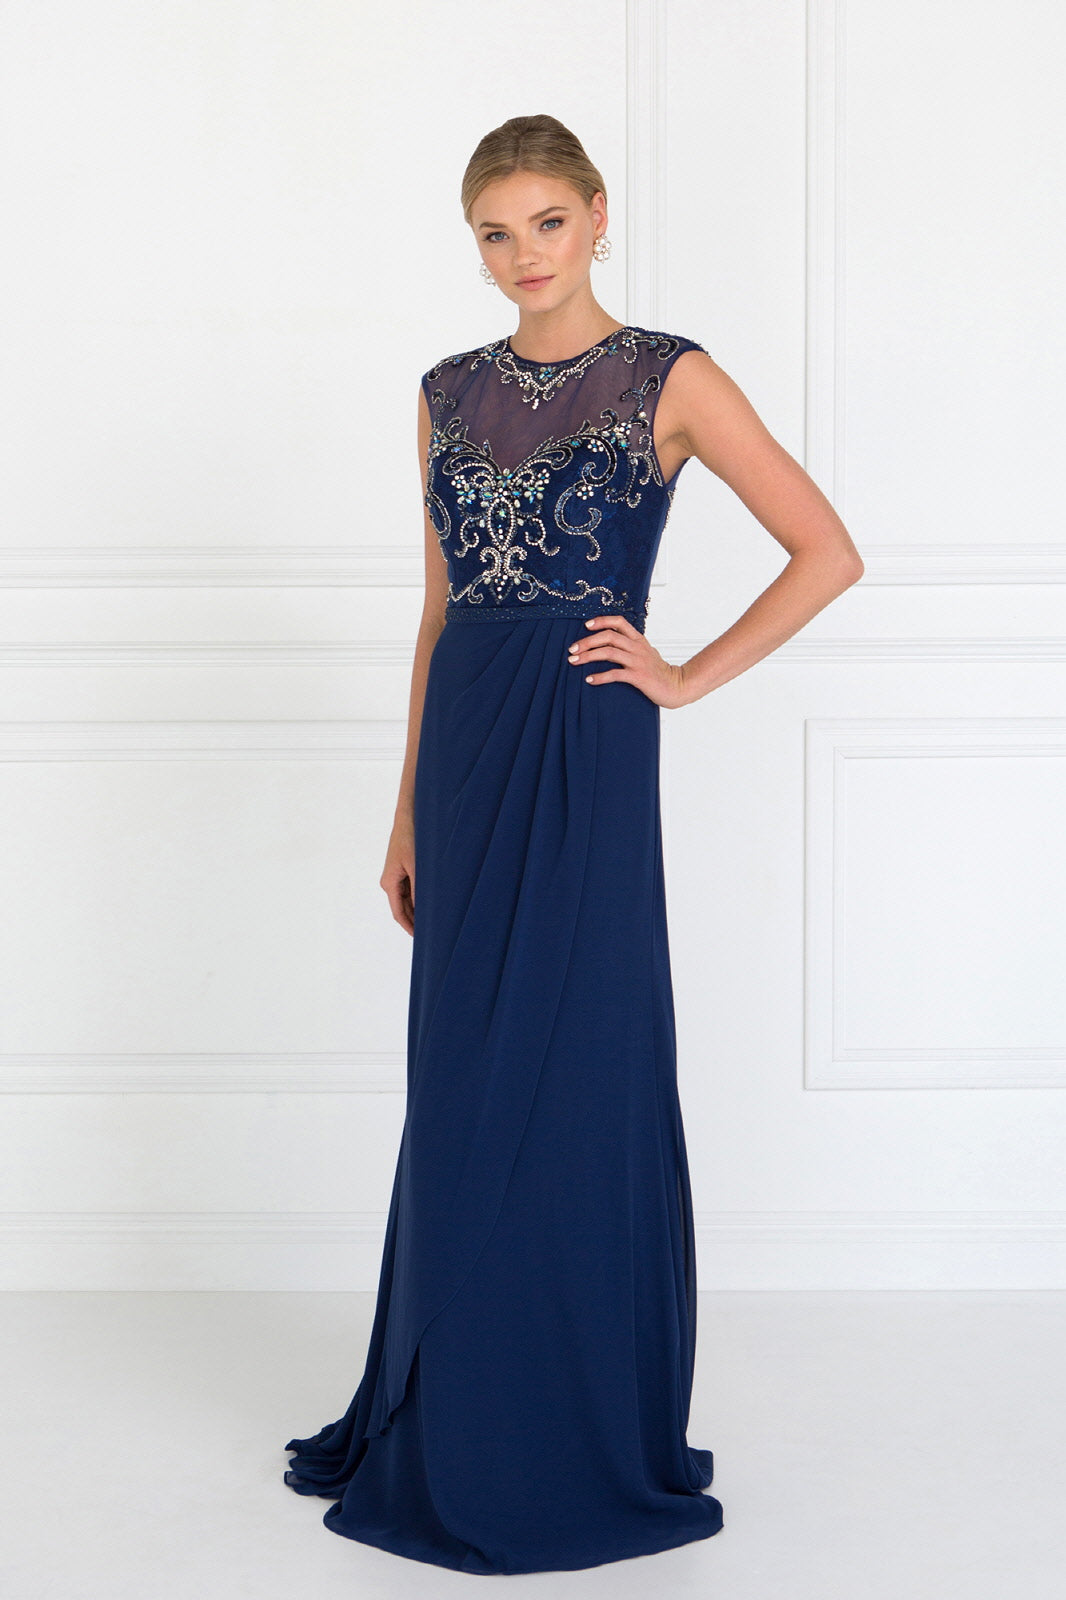 Sleeveless Chiffon Floor Length Dress with Jewel Embellished Bodice and Back GLGL2099 Elsy Style MOTHER OF BRIDE